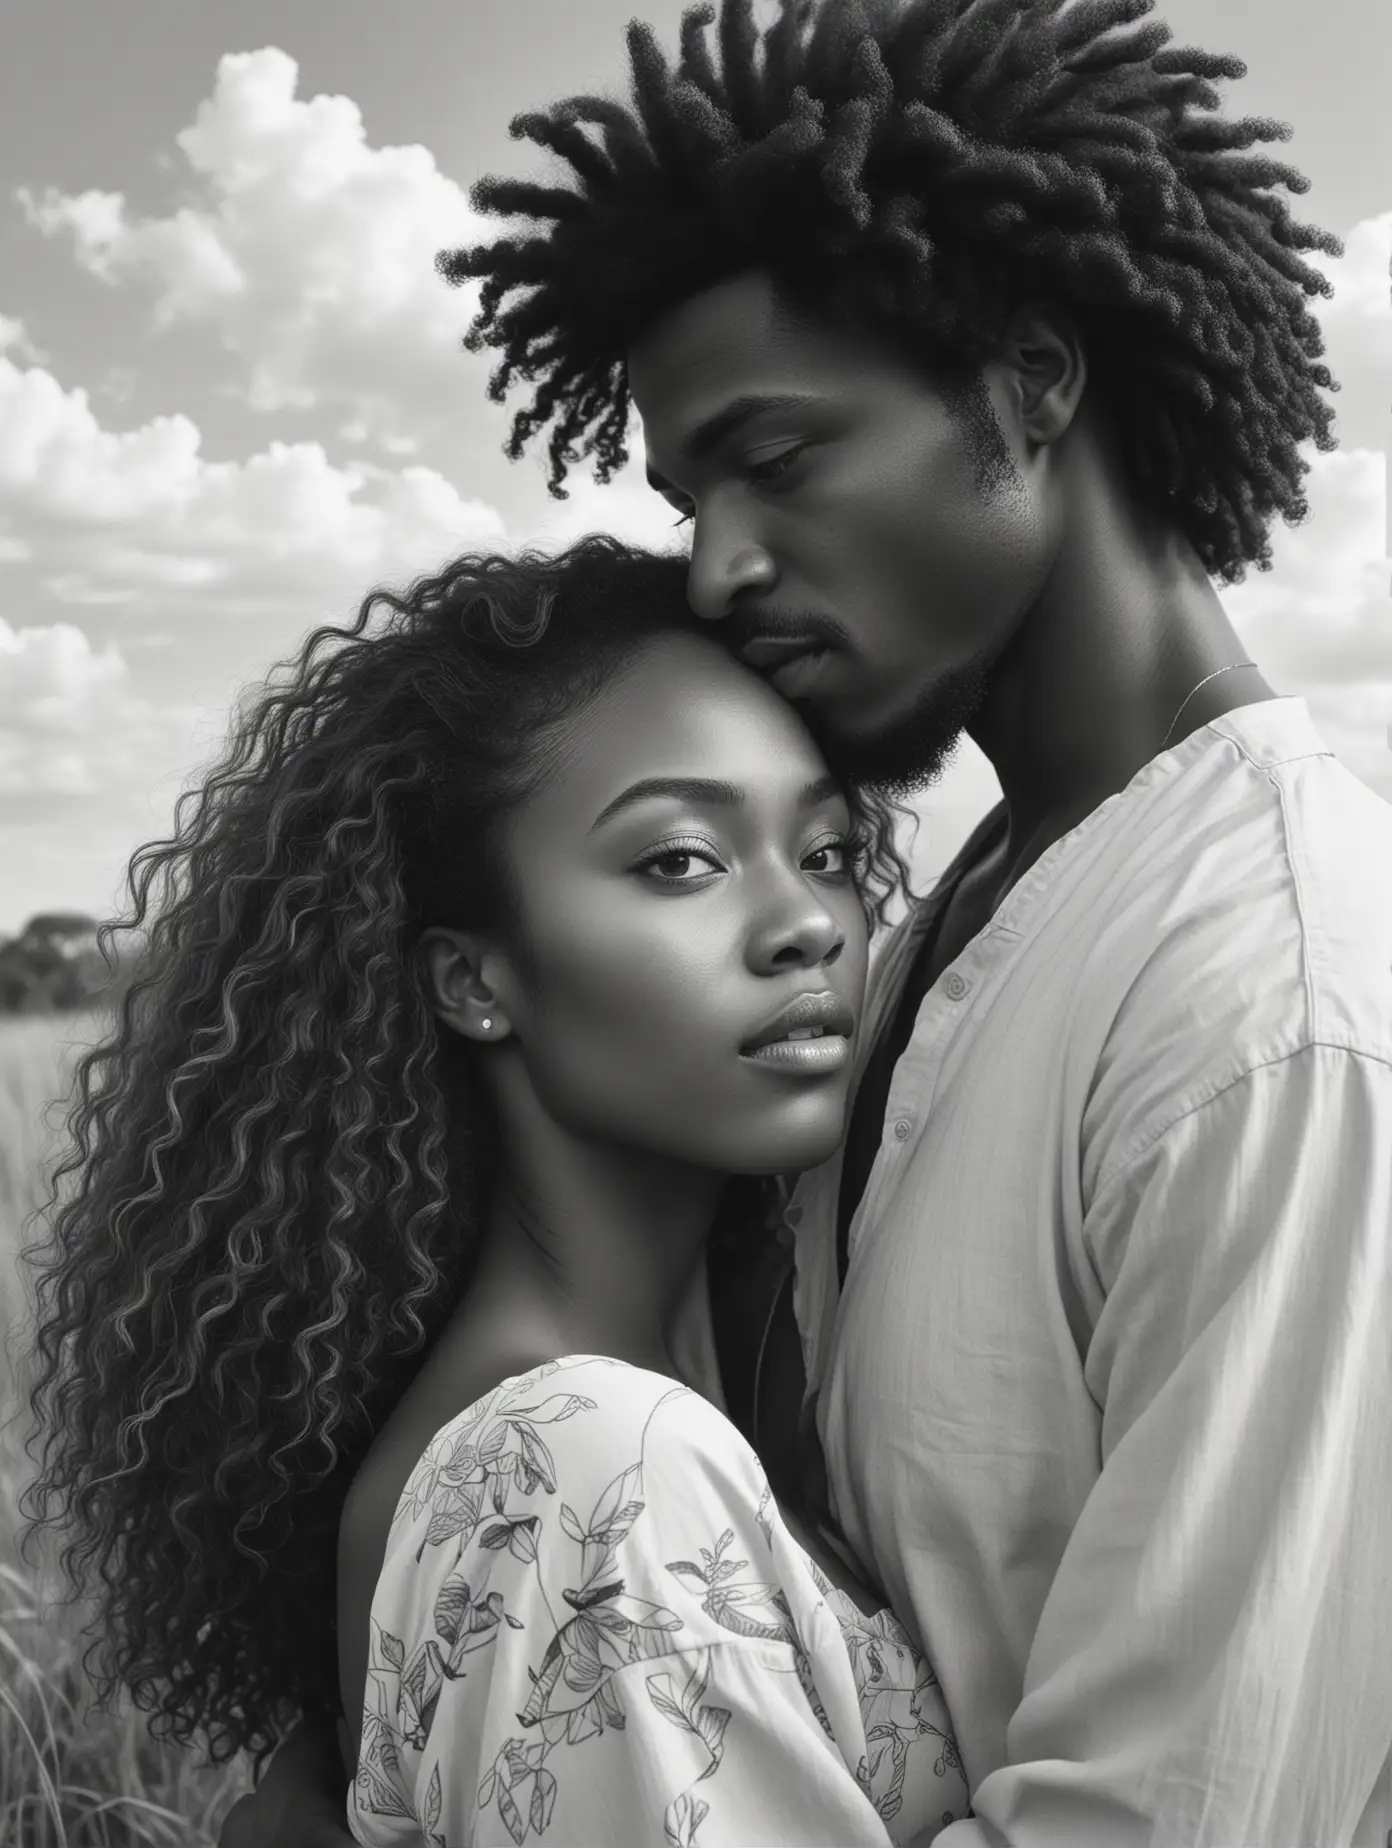 Create a black and white illustration of a scenery in the savanna:  a romantic bi racial couple, close up